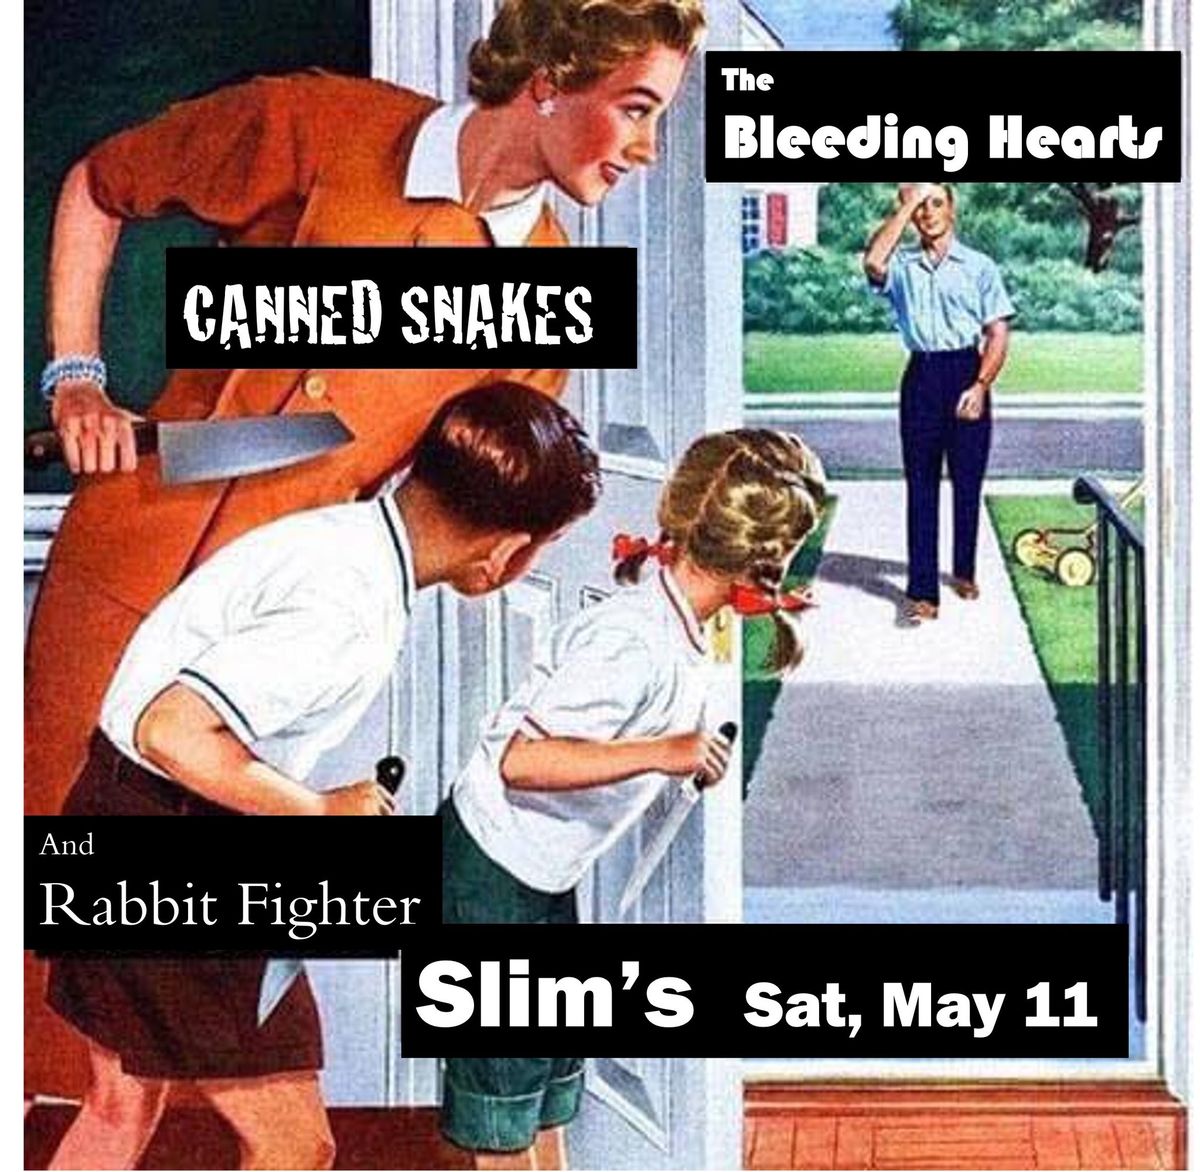 The Bleeding Hearts with Canned Snakes and Rabbit Fighter